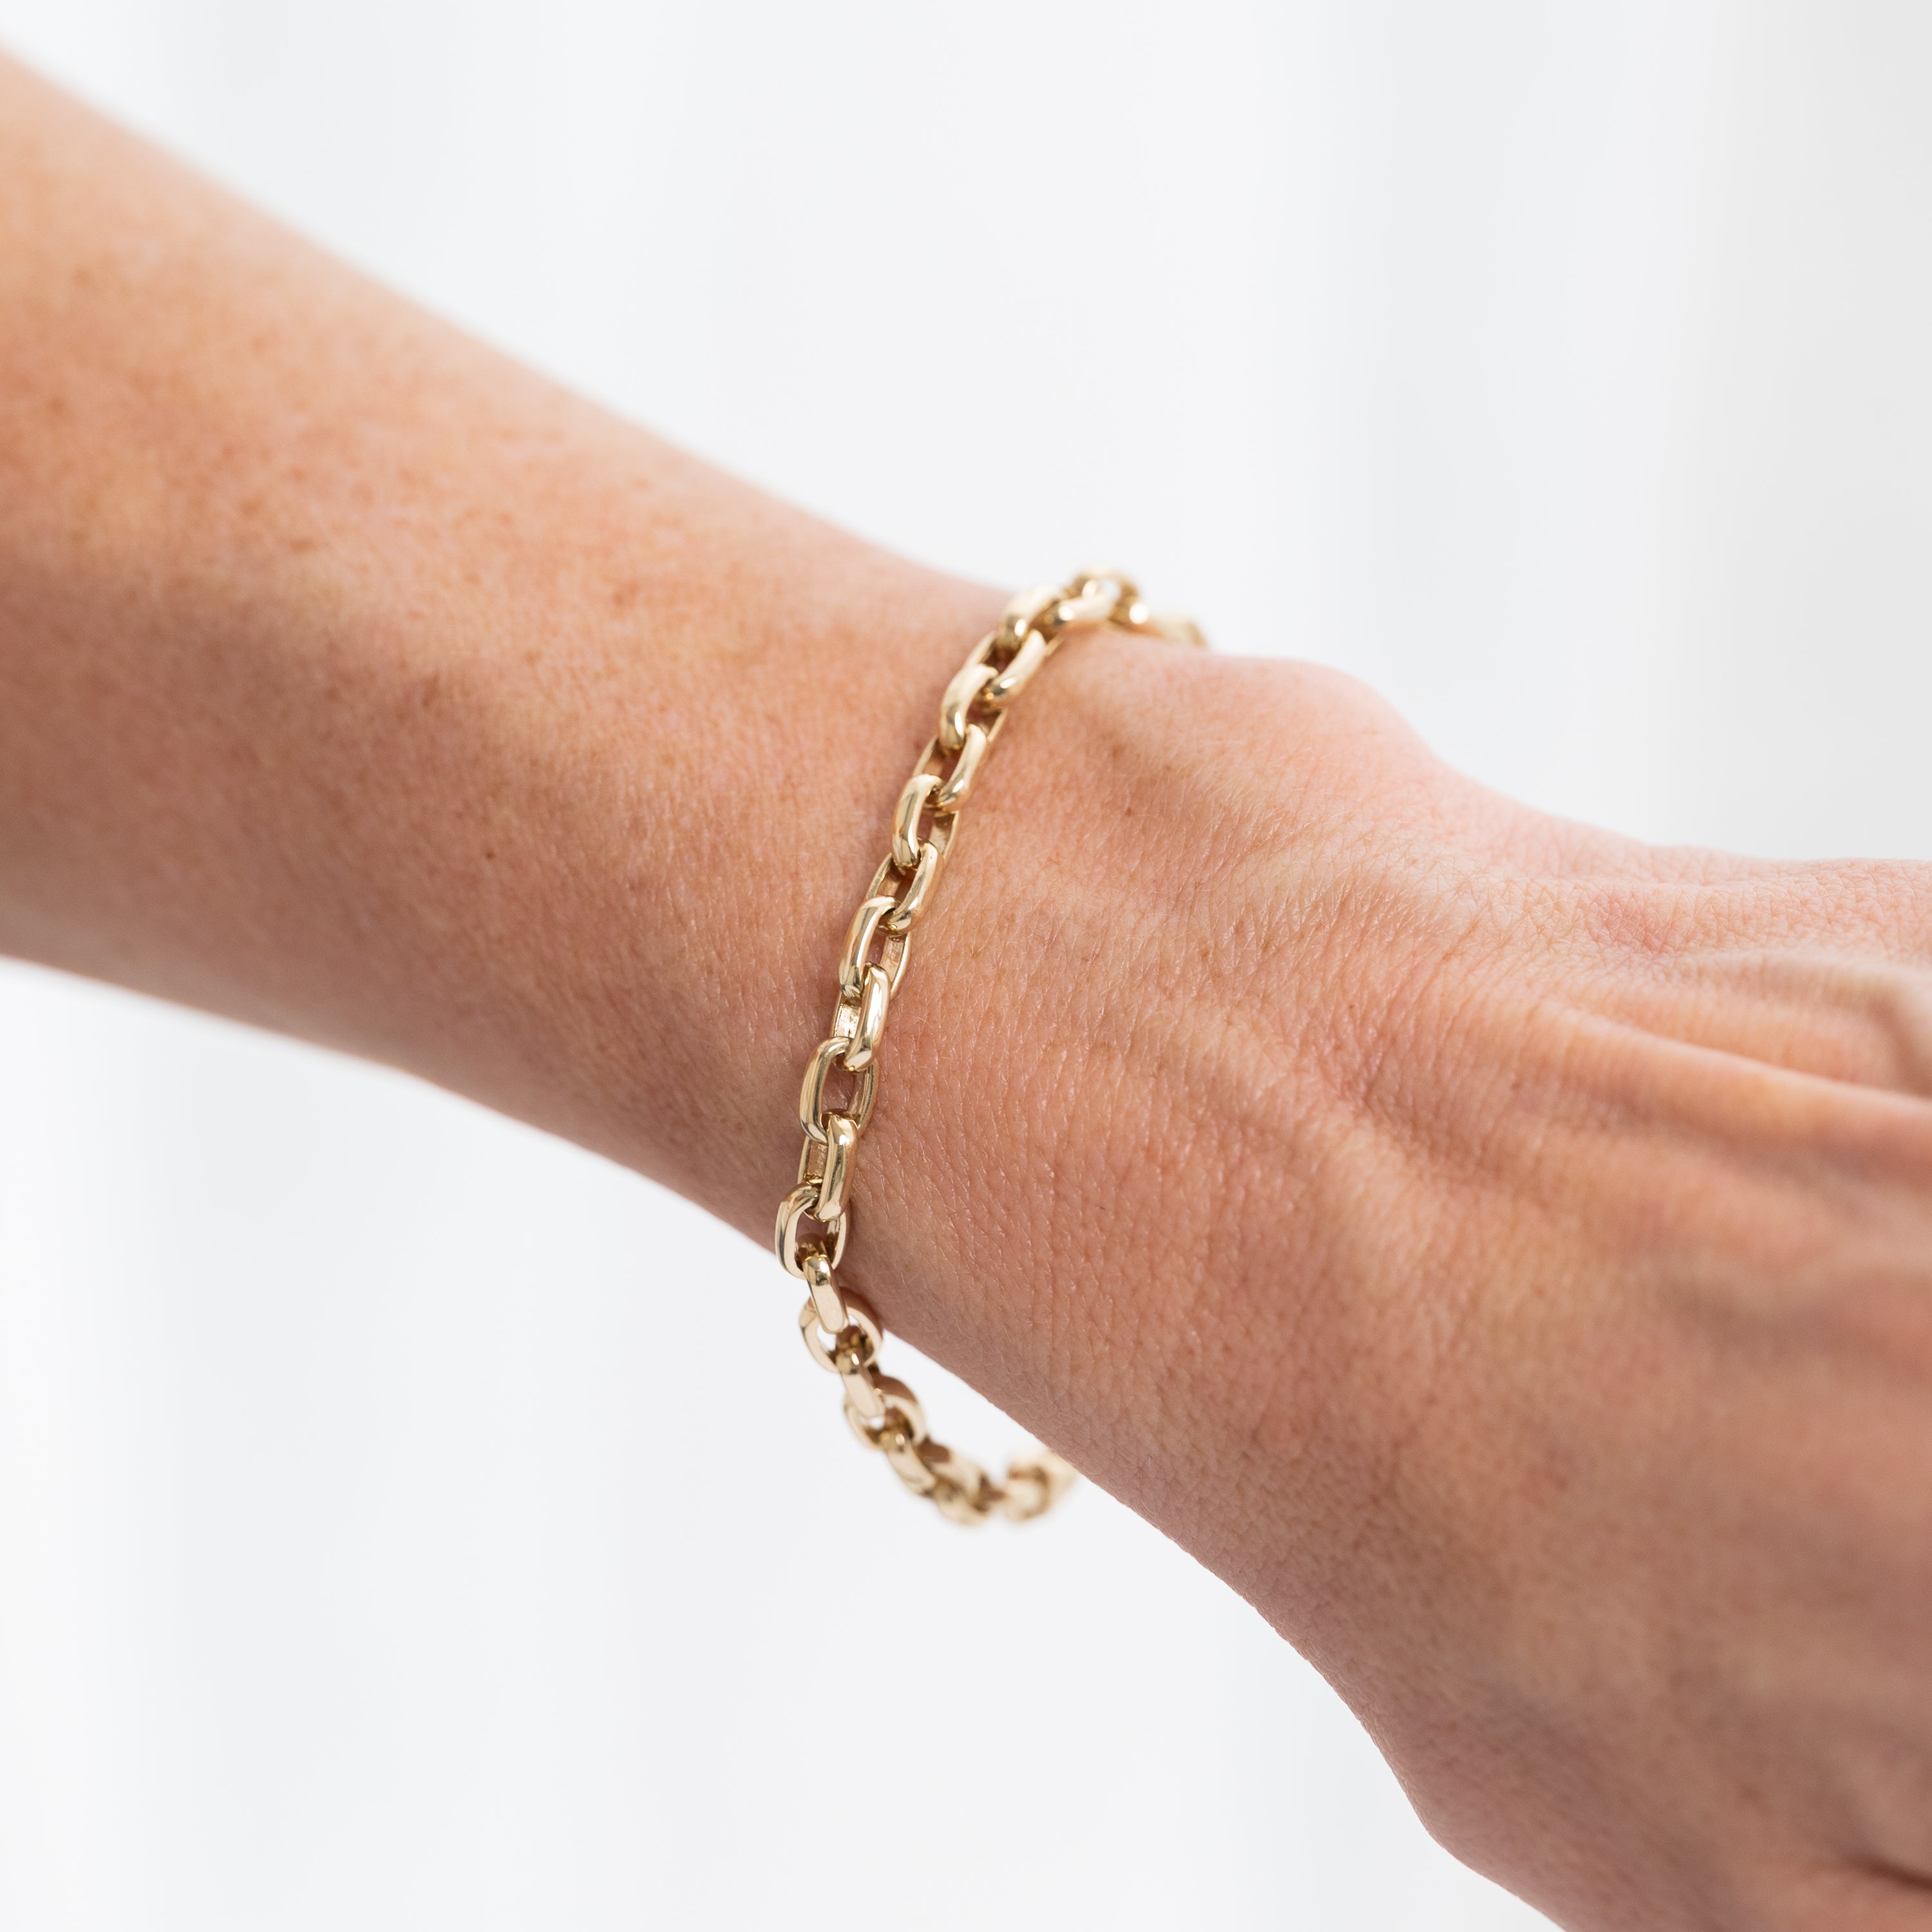 The Hammered Chain Link Bracelet – Yearly Co.